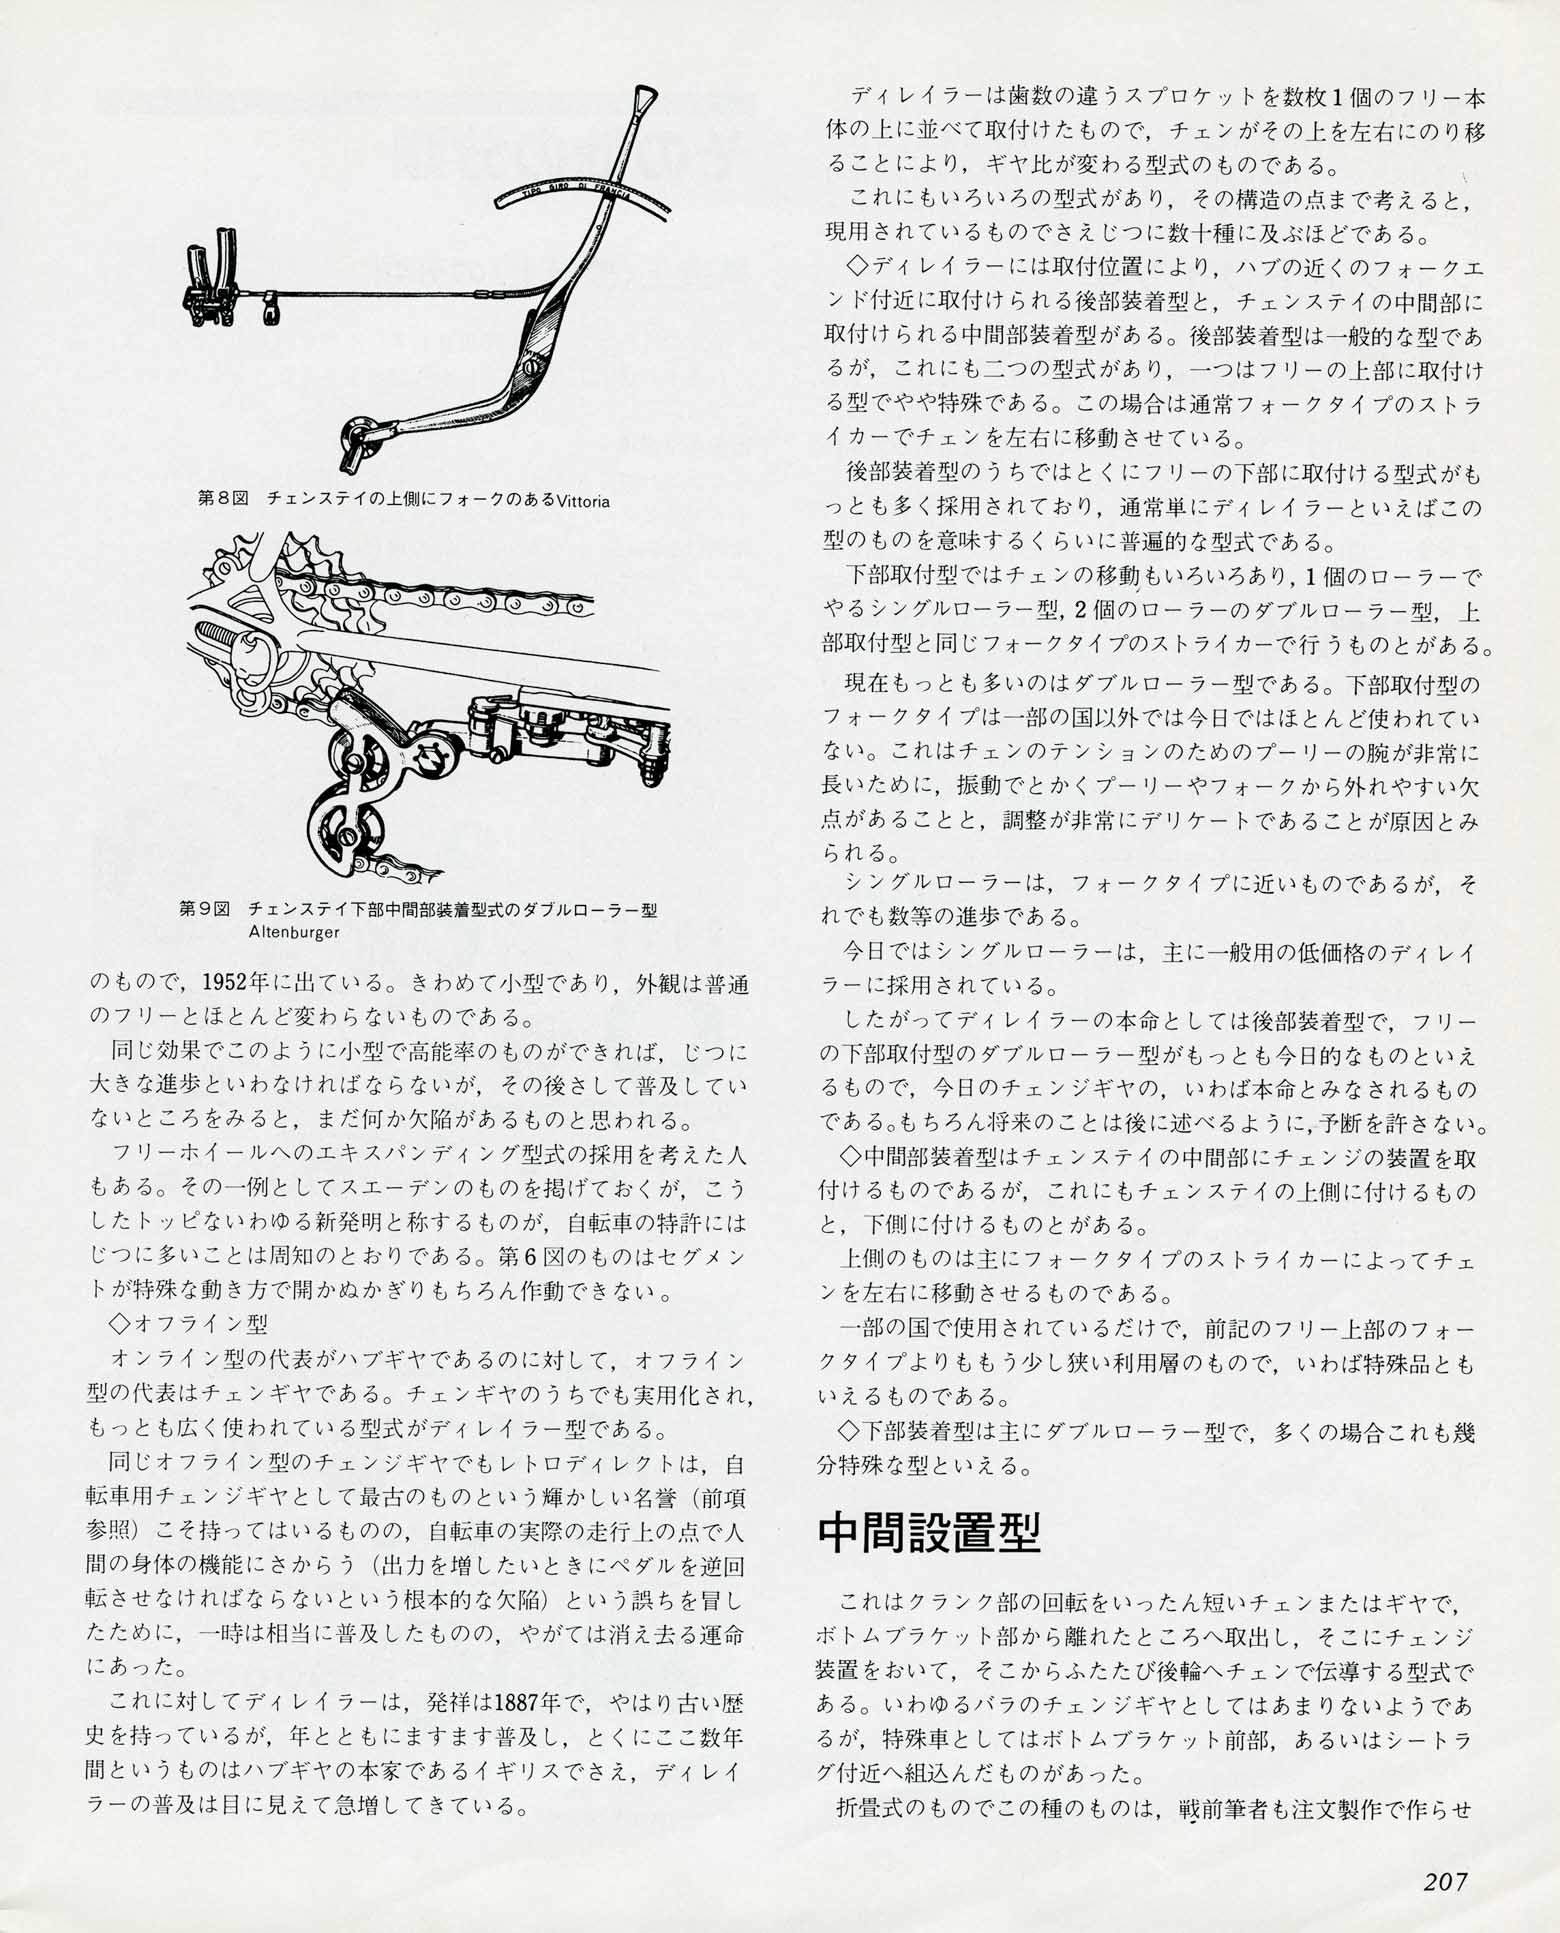 New Cycling May 1981 - Derailleur Collection page 207 main image